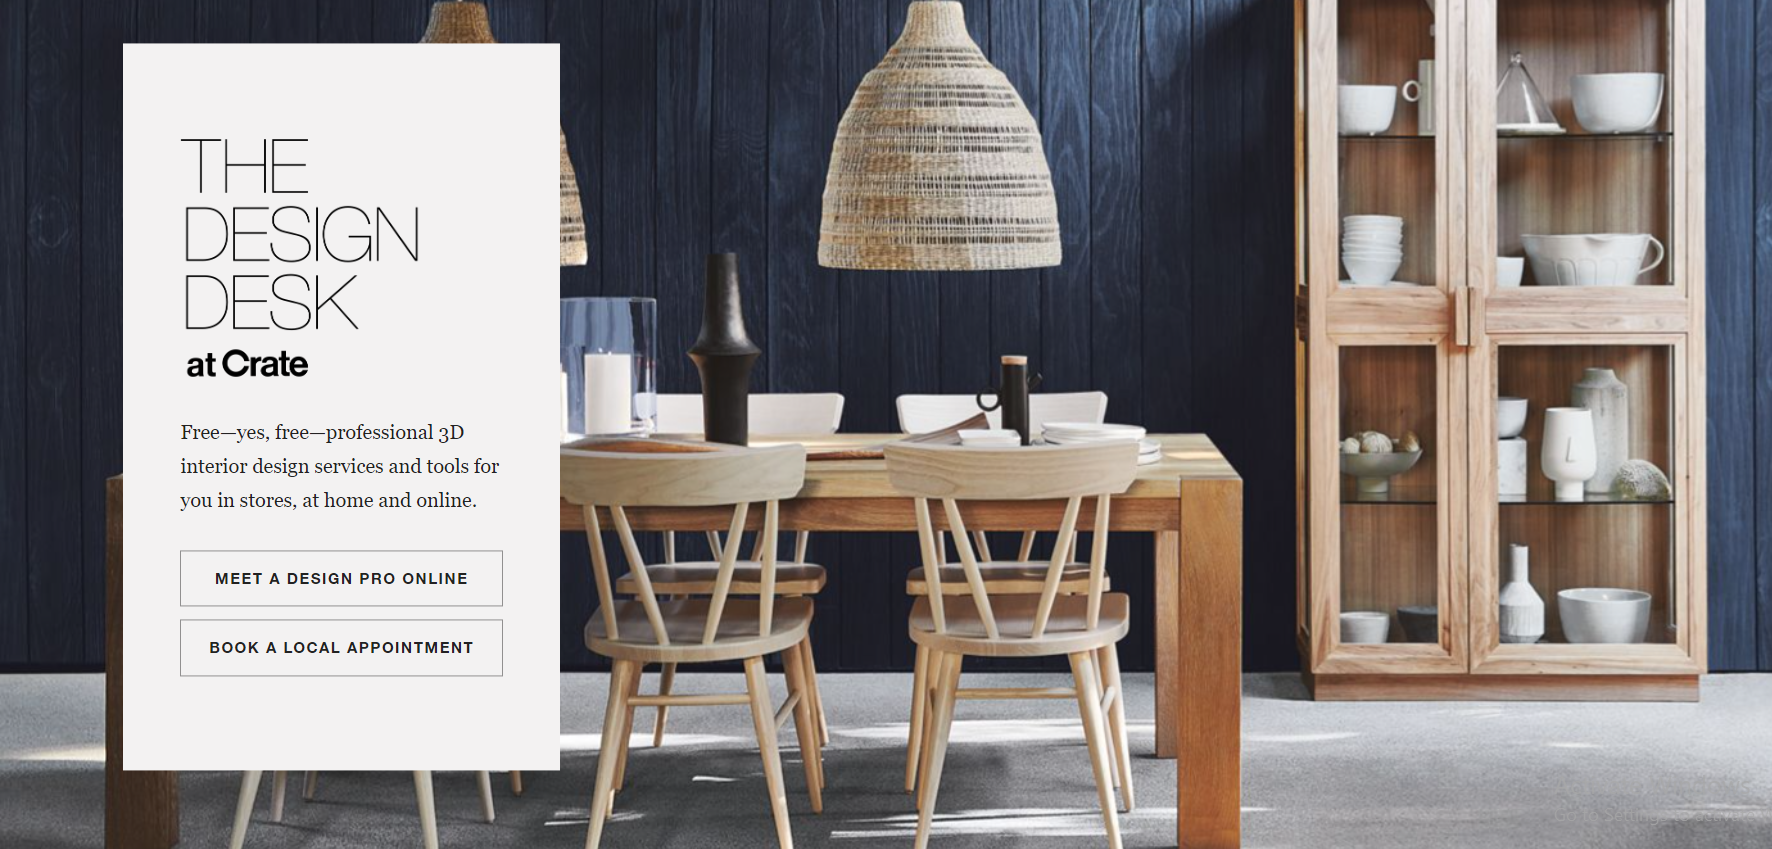 Crate & Barrel Promo Codes Get 20 OFF On Full Priced Items Almowafir